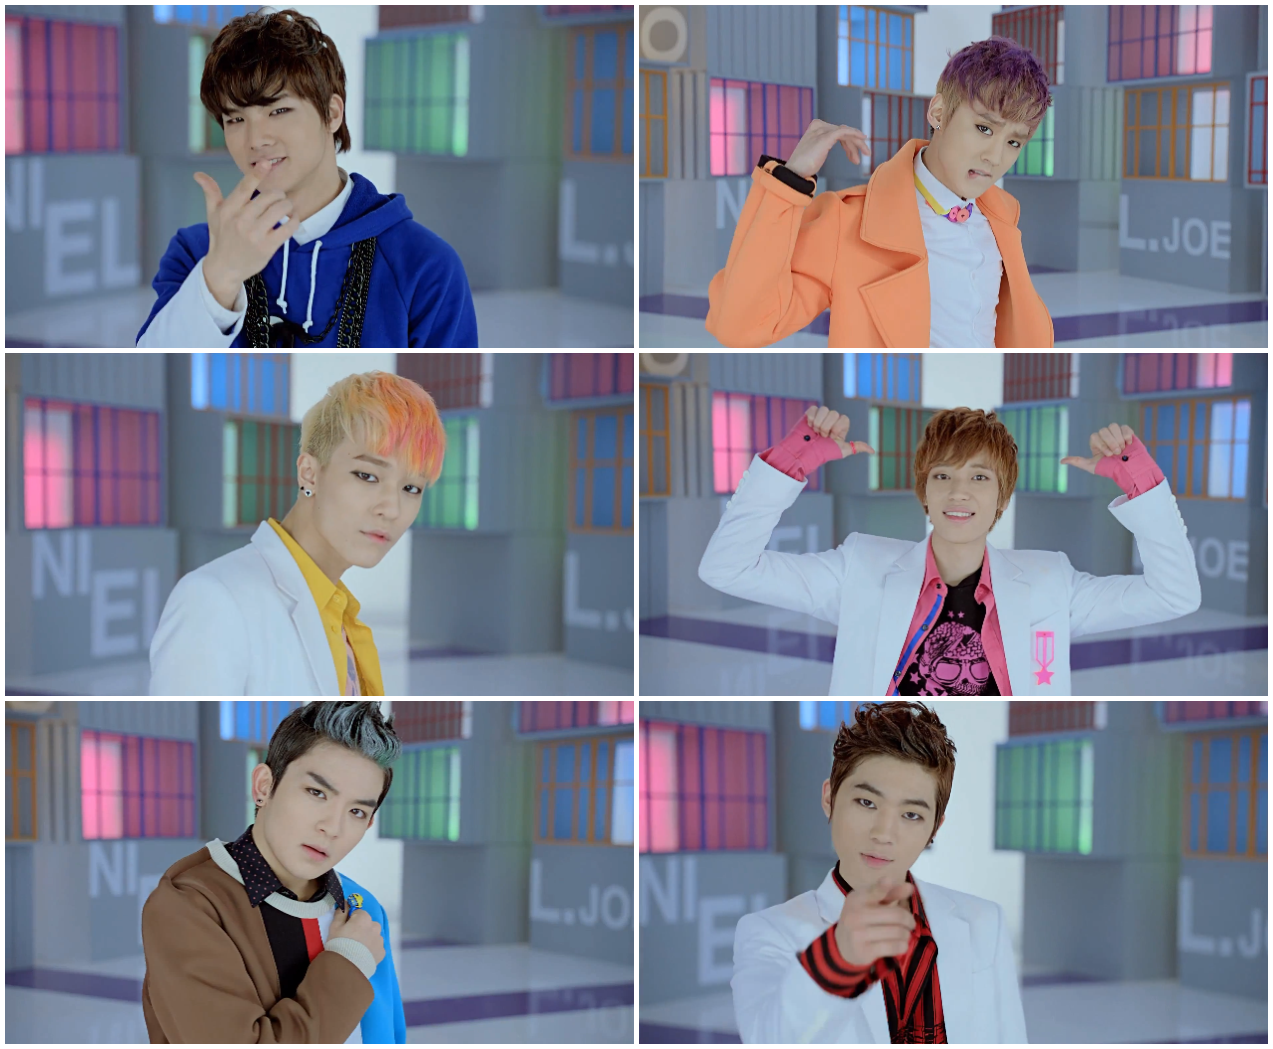 Kiss Kpop Review: Teen Top–“Miss Right”